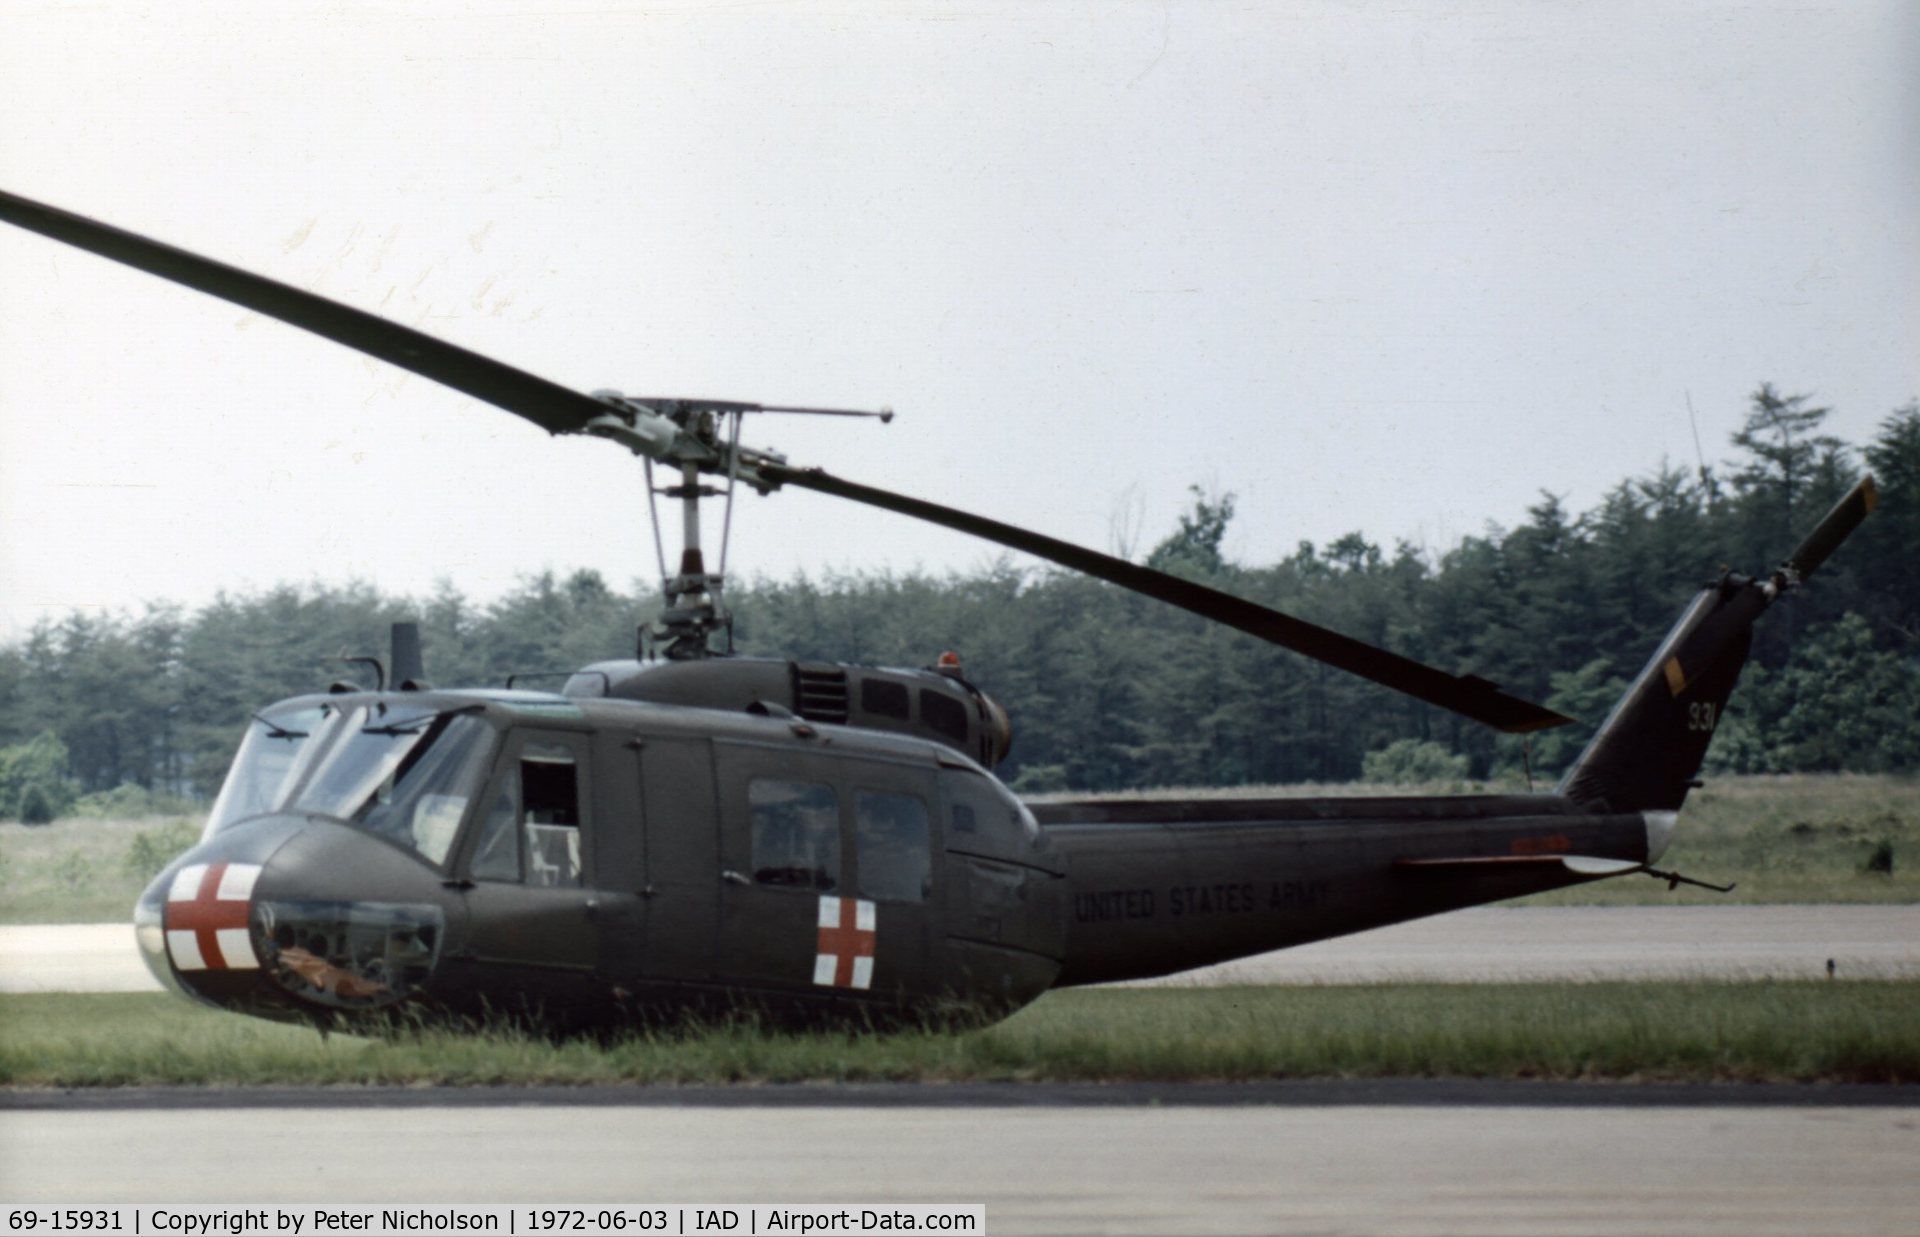 69-15931, 1969 Bell UH-1H Iroquois C/N 12219, This Huey of 212 Med Det at Ft. Meade was part of the emergency cover at Transpo 72 held at Dulles Airport.